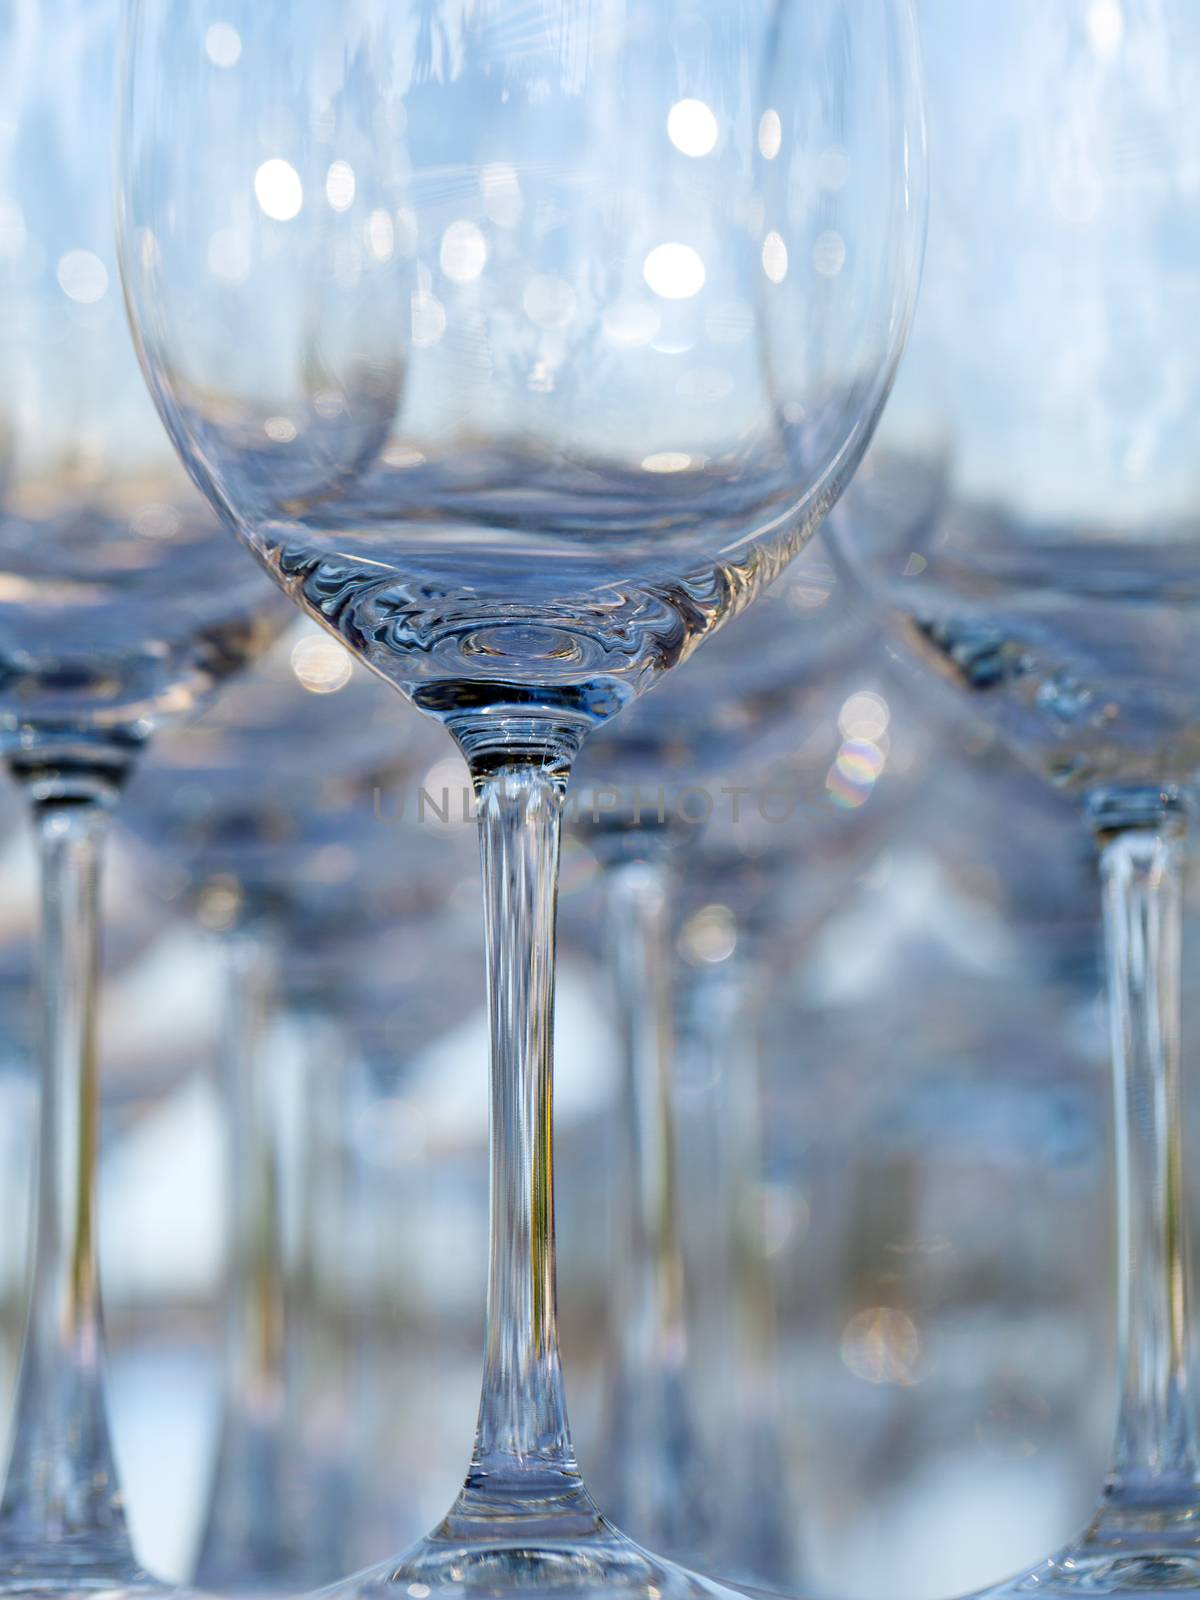 Blurred and bokeh of wine and champagne glass setting for weddin by kerdkanno